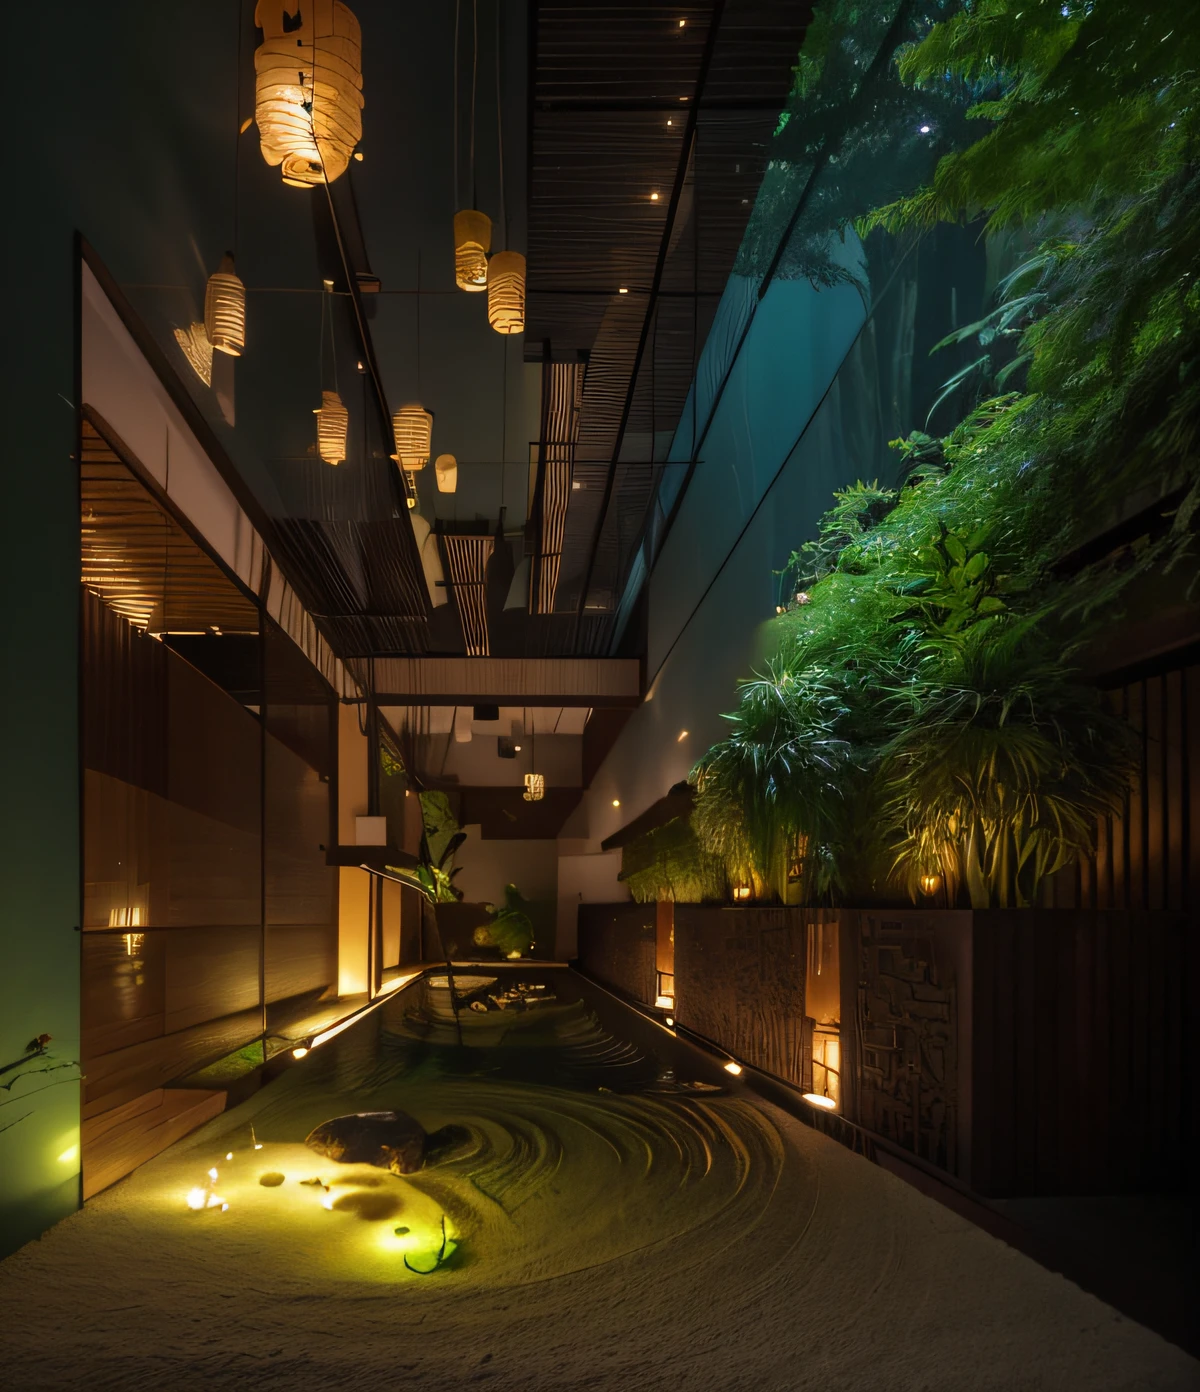 cave interior, a photo of indoor garden, tropical garden, (minimalism style), lighten wood, indoors, exterior, trees, green architecture, lantern light, sand, bamboo, forest, architecture visualization, photography, 8k, masterpiece, ultra quality, (Meditation), relaxing, night light, no human